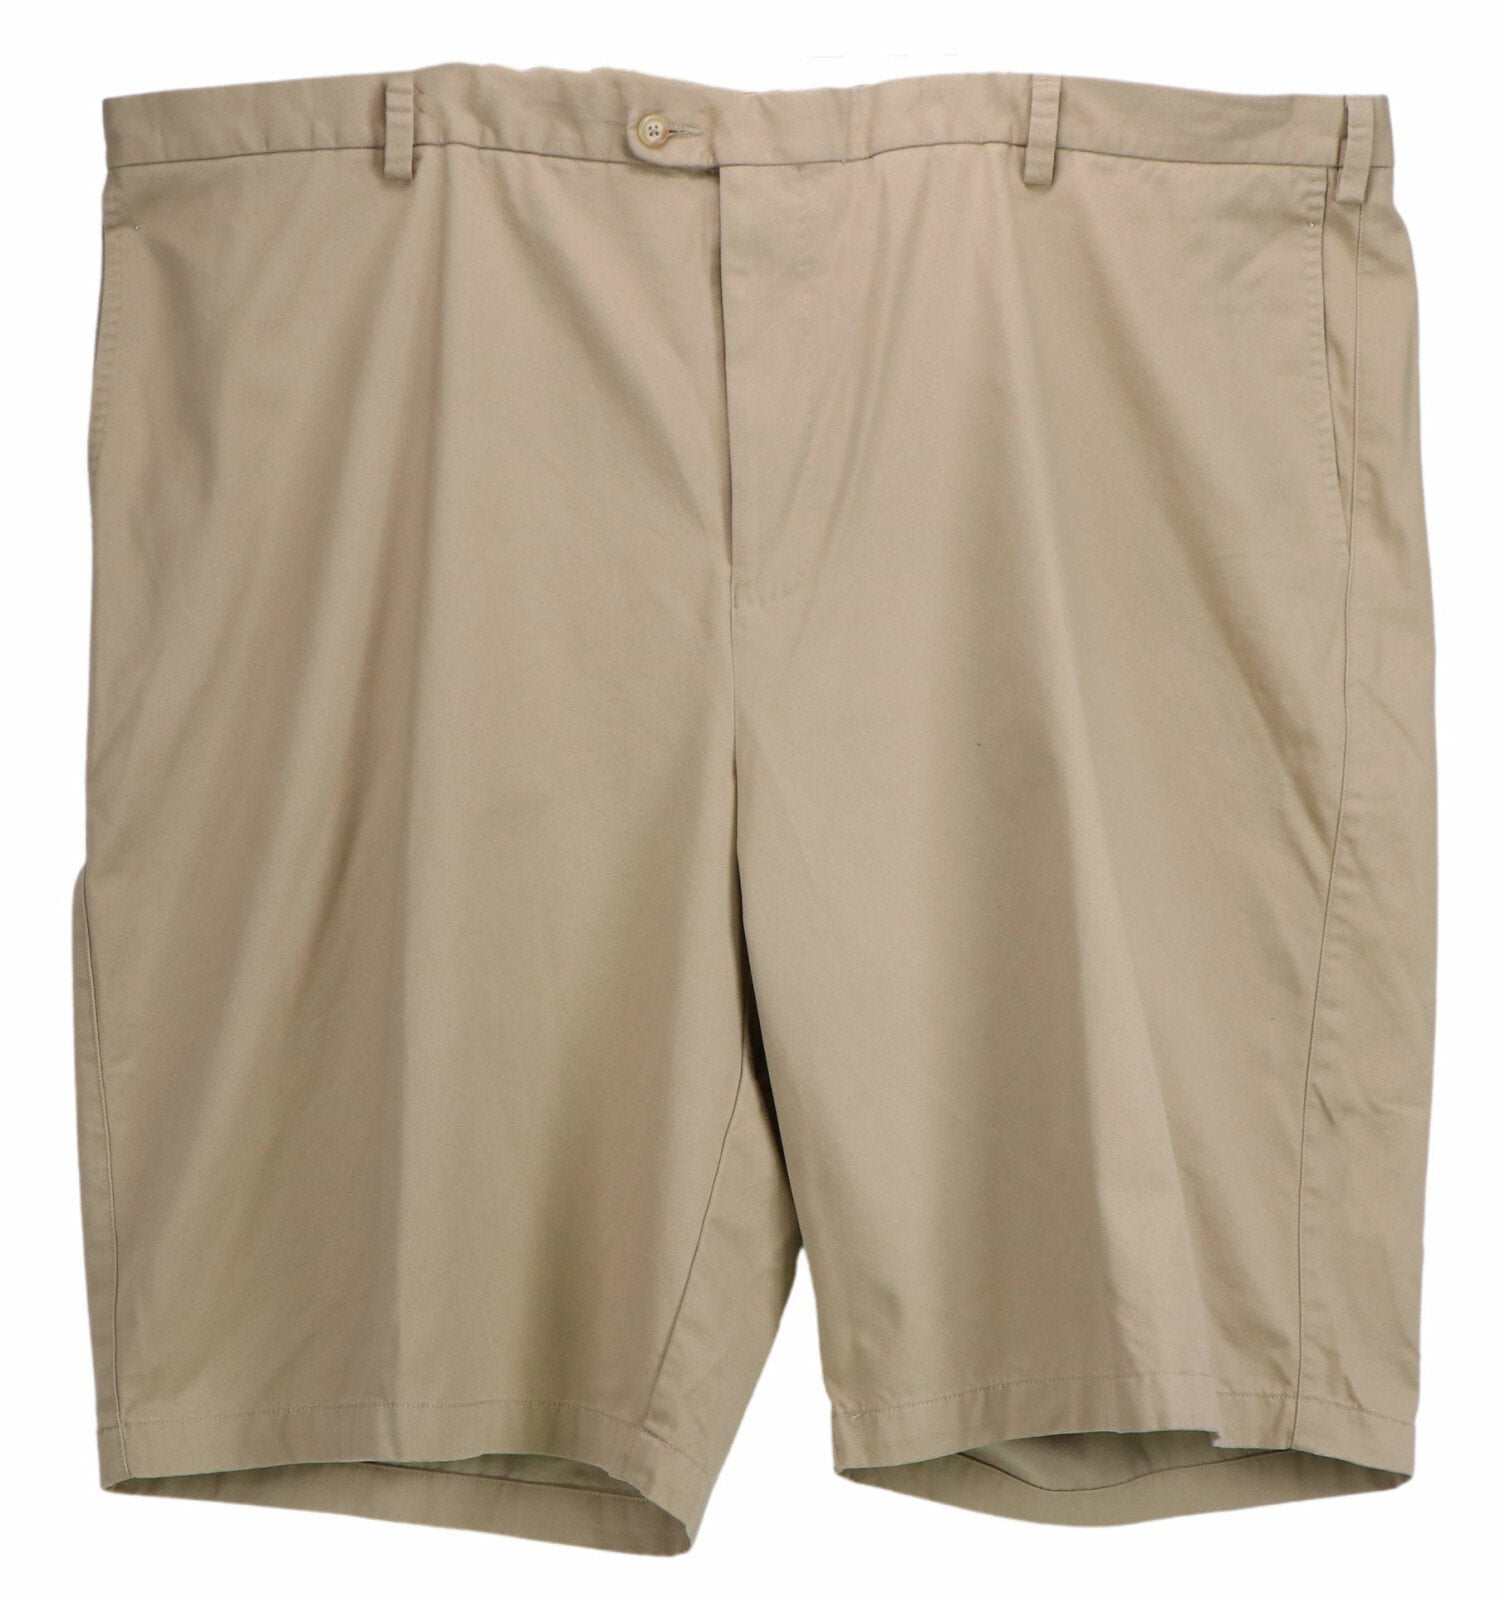 for Men Mens Shorts Woolrich Shorts Save 48% Woolrich Shorts in Beige Natural 